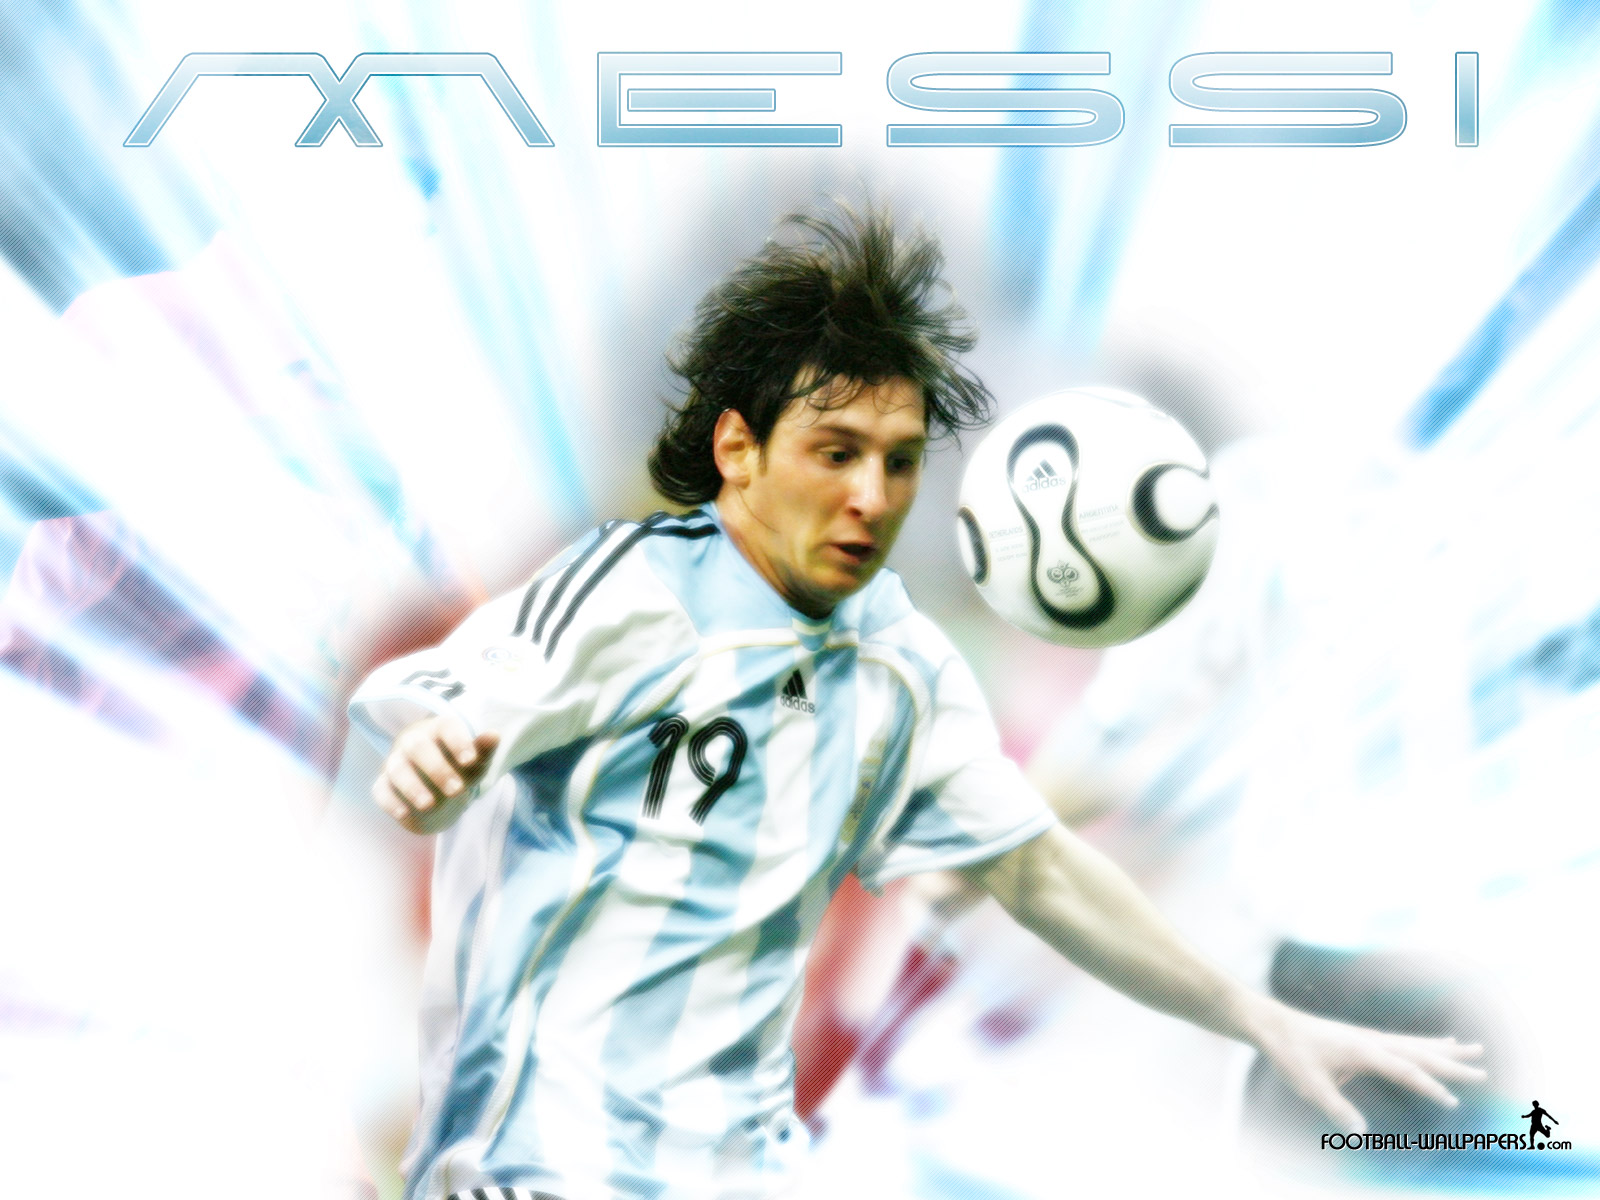 Lionel Messi News and Pictures: Lionel Messi wallpaper